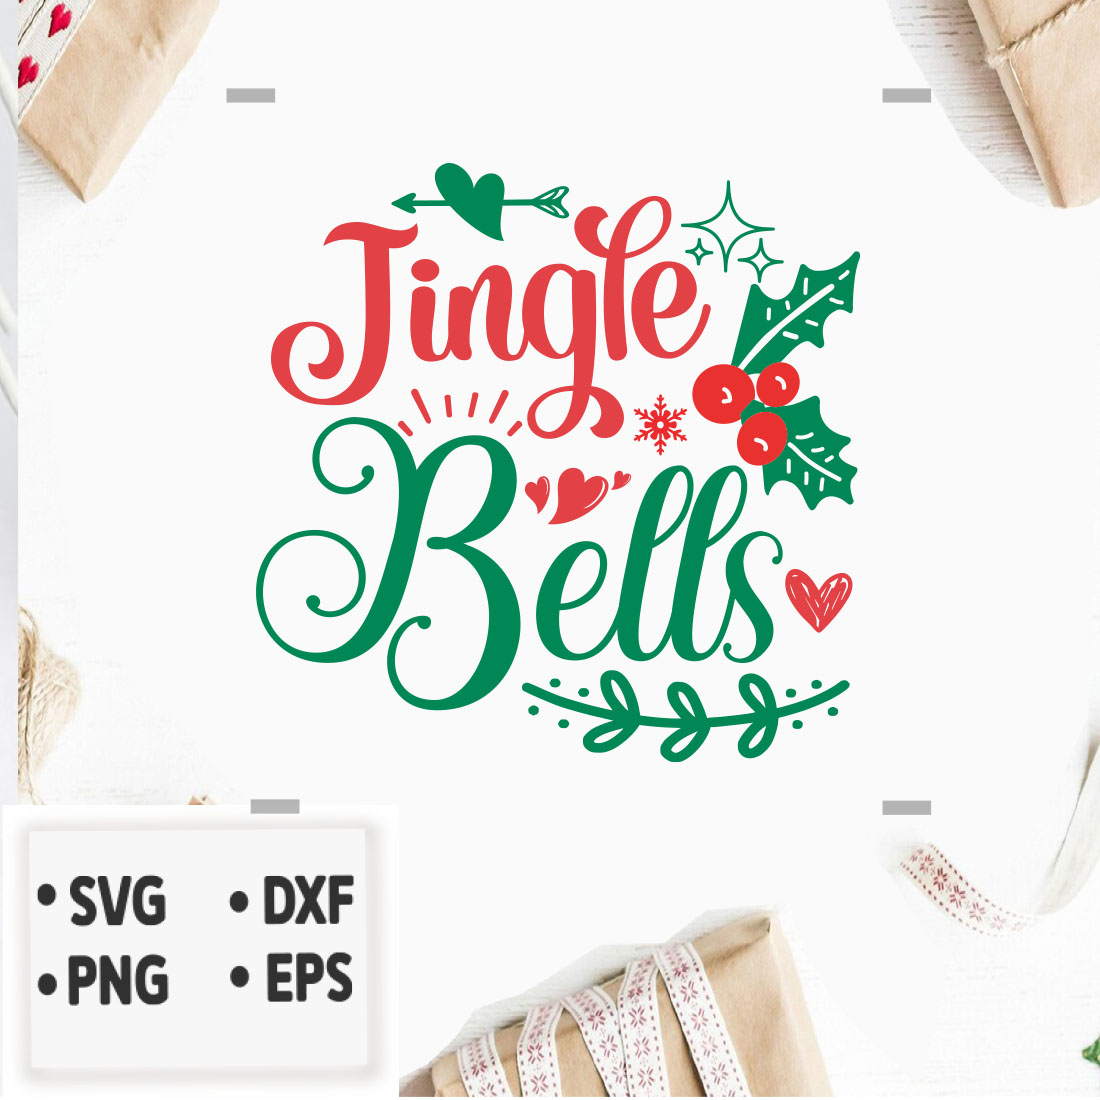 Picture with wonderful print Jingle bells.